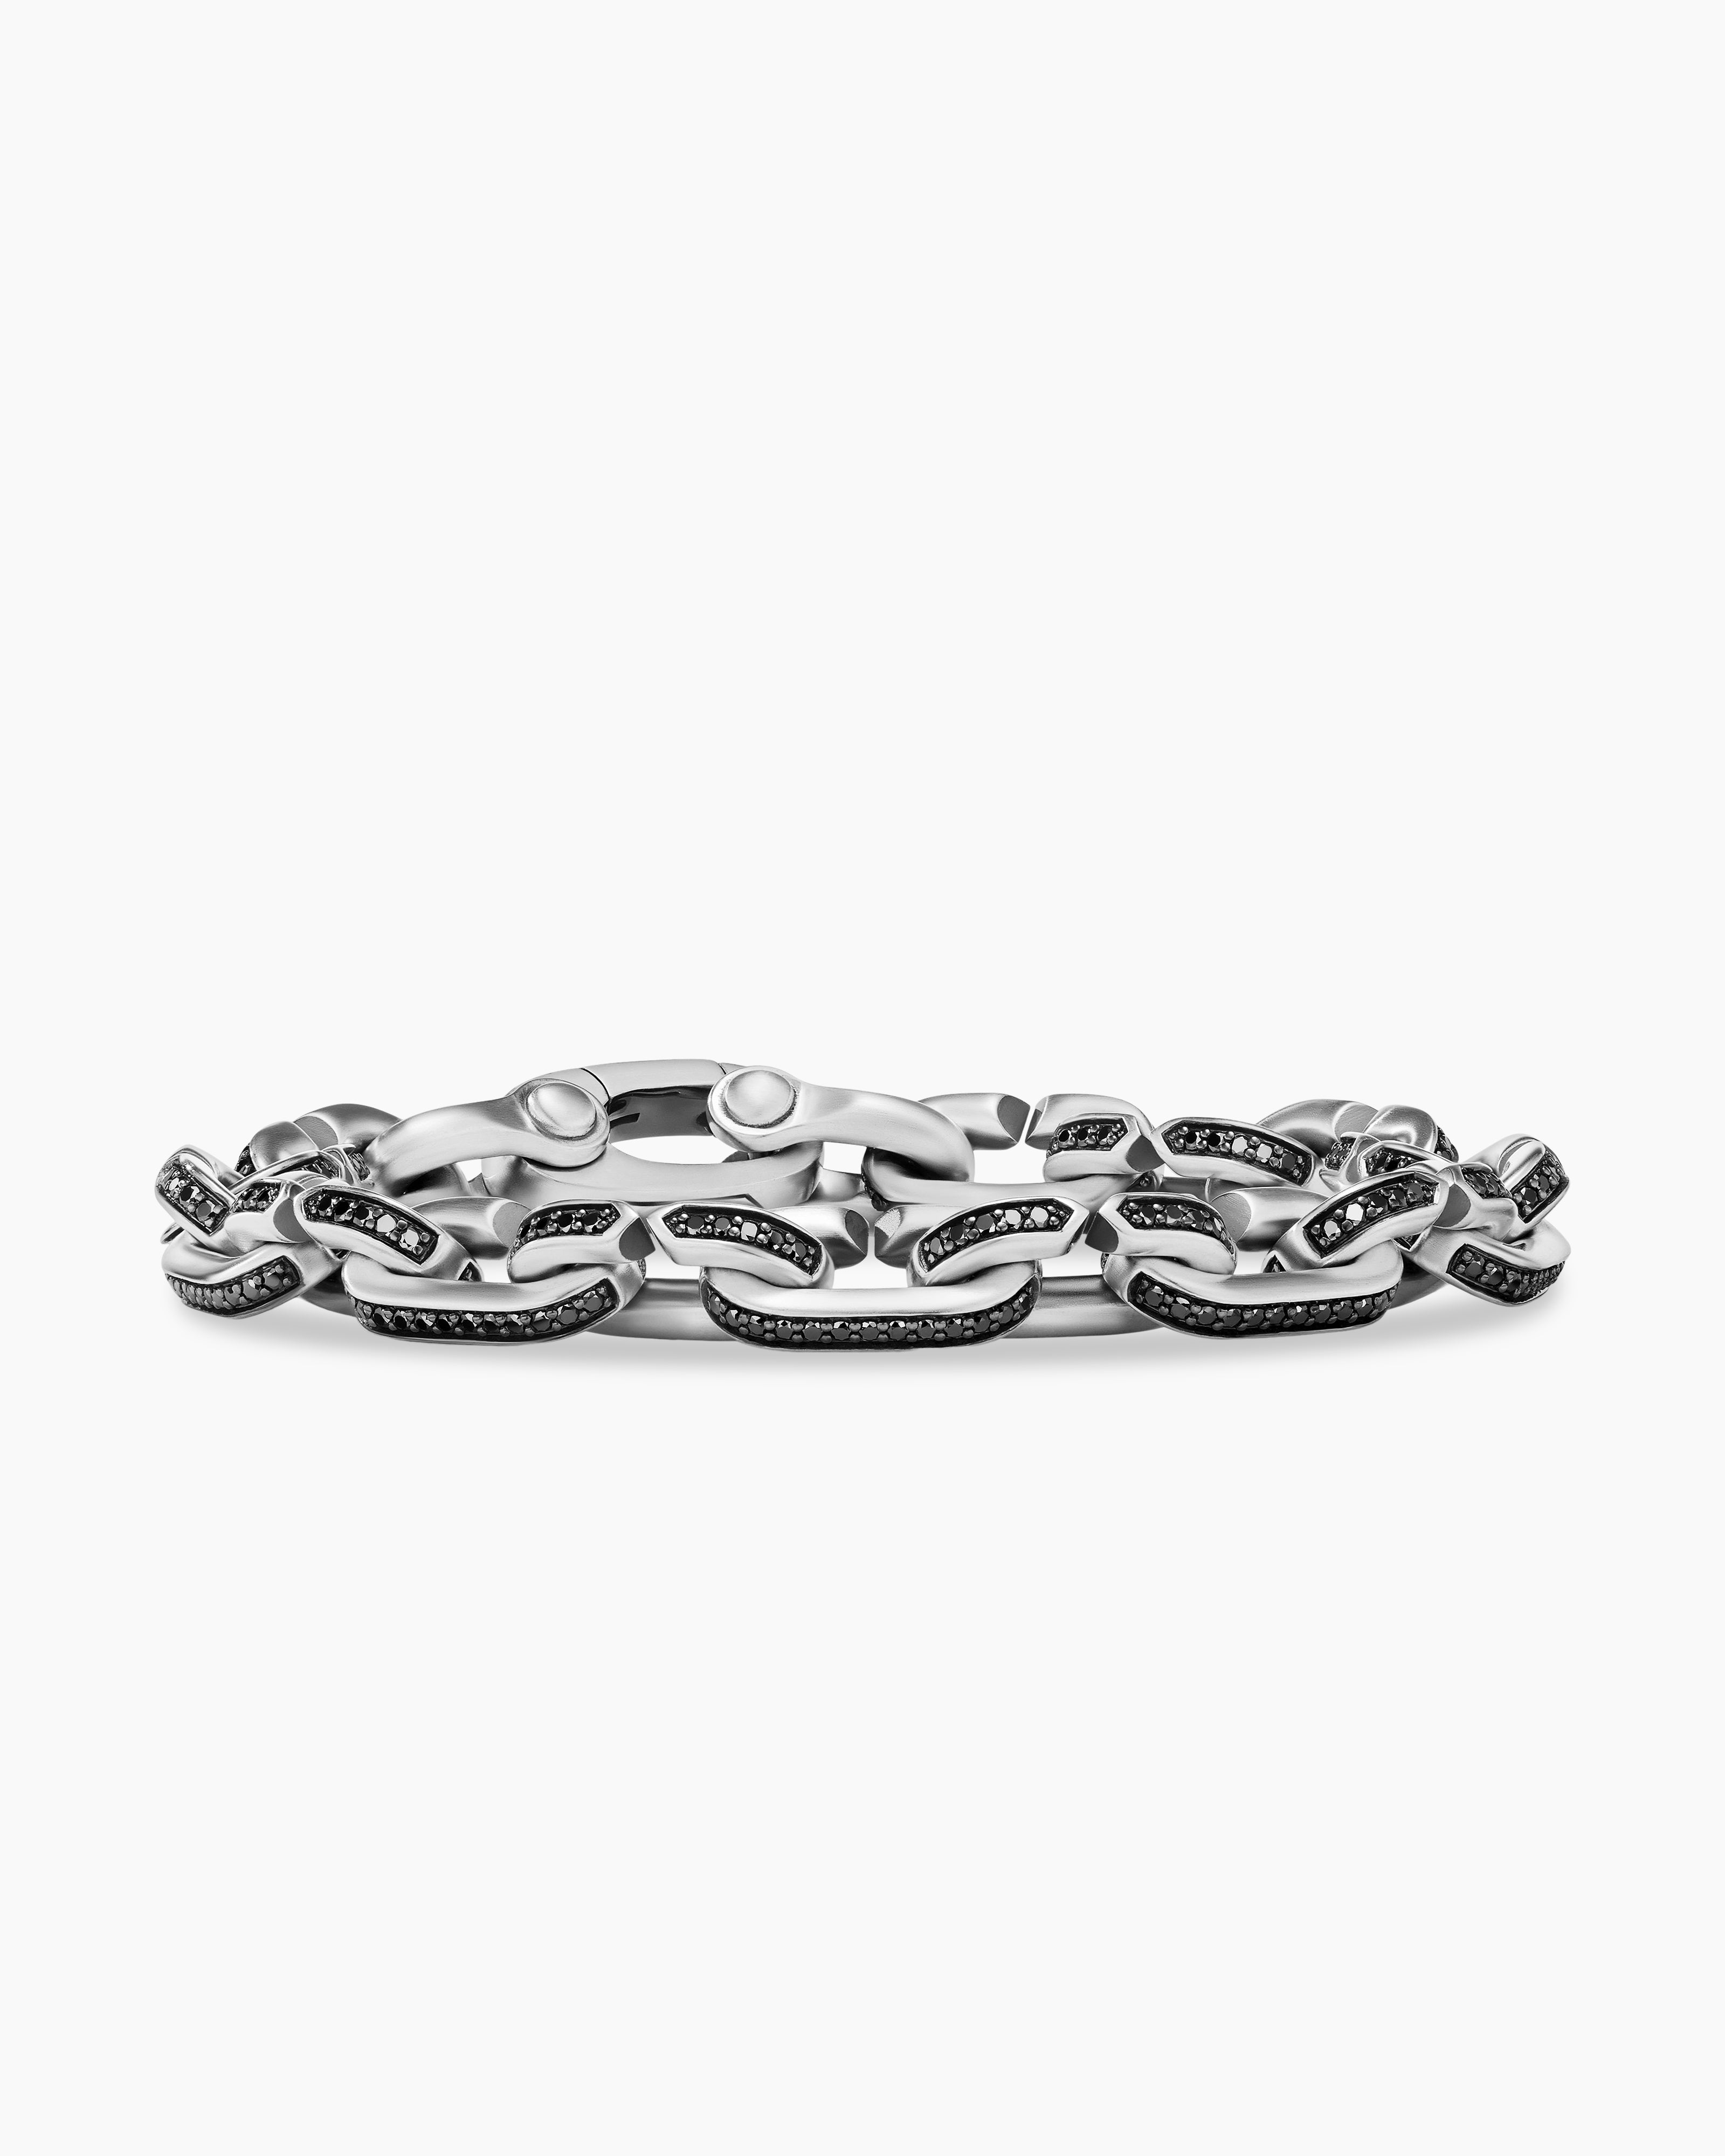 Small Chain Link Bracelet with Large Diamond Link